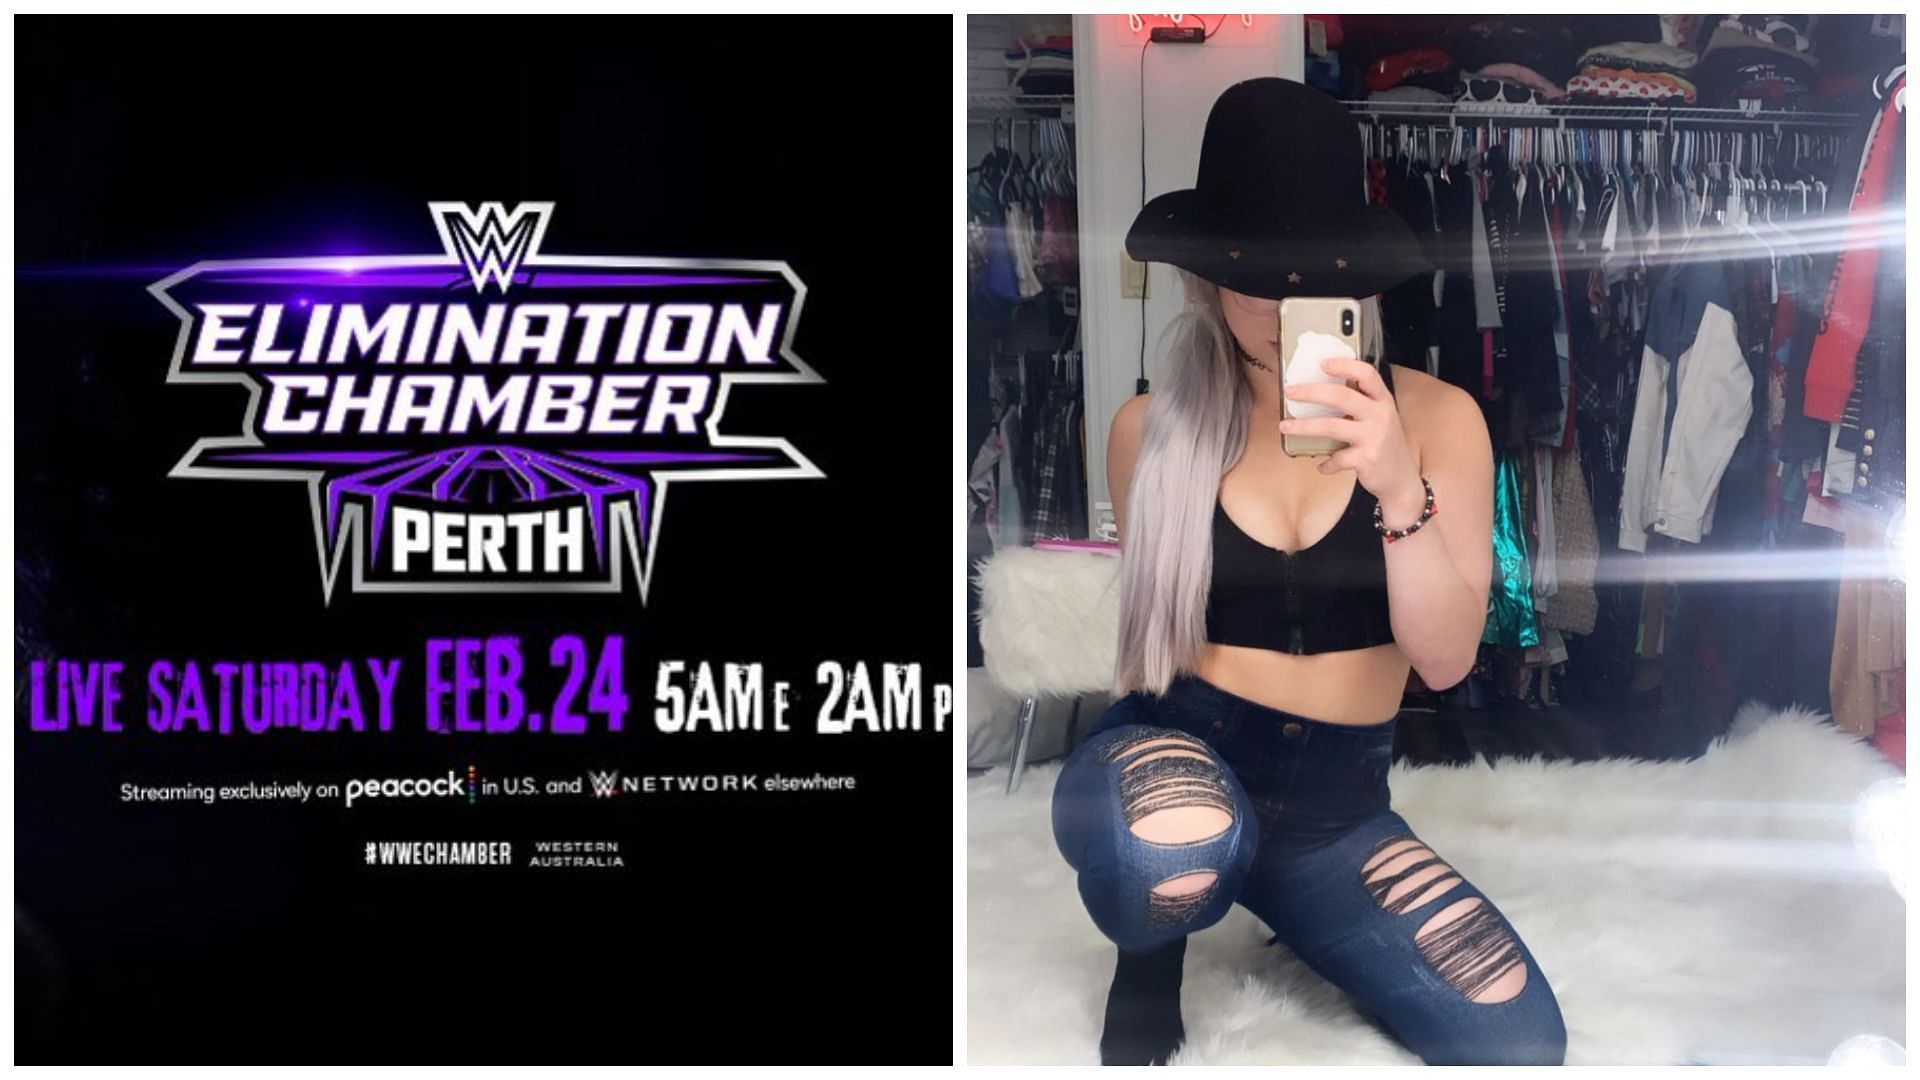 WWE Elimination Chamber is set for February 24.